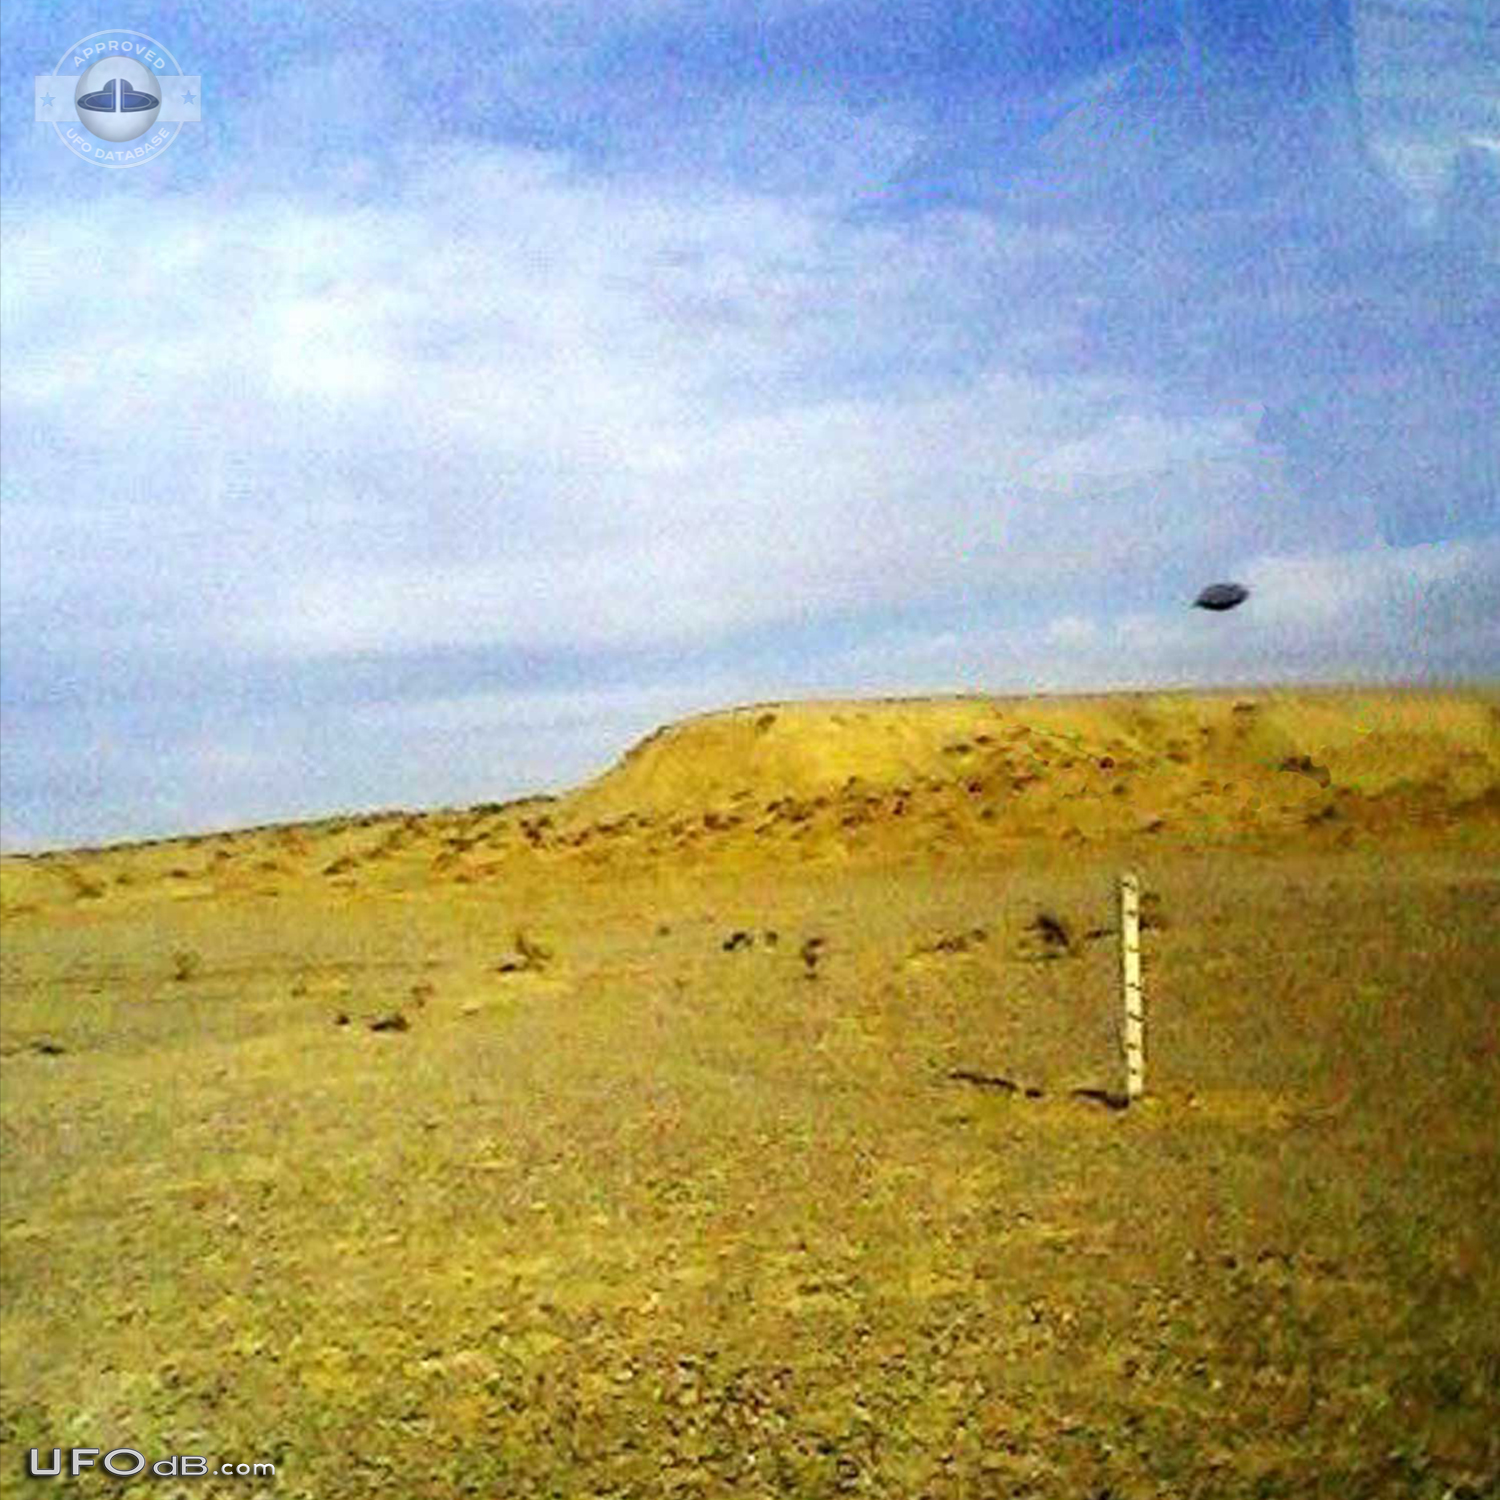 UFO in inner Mulei Mongolia, China caught on picture in November 2008 UFO Picture #439-2